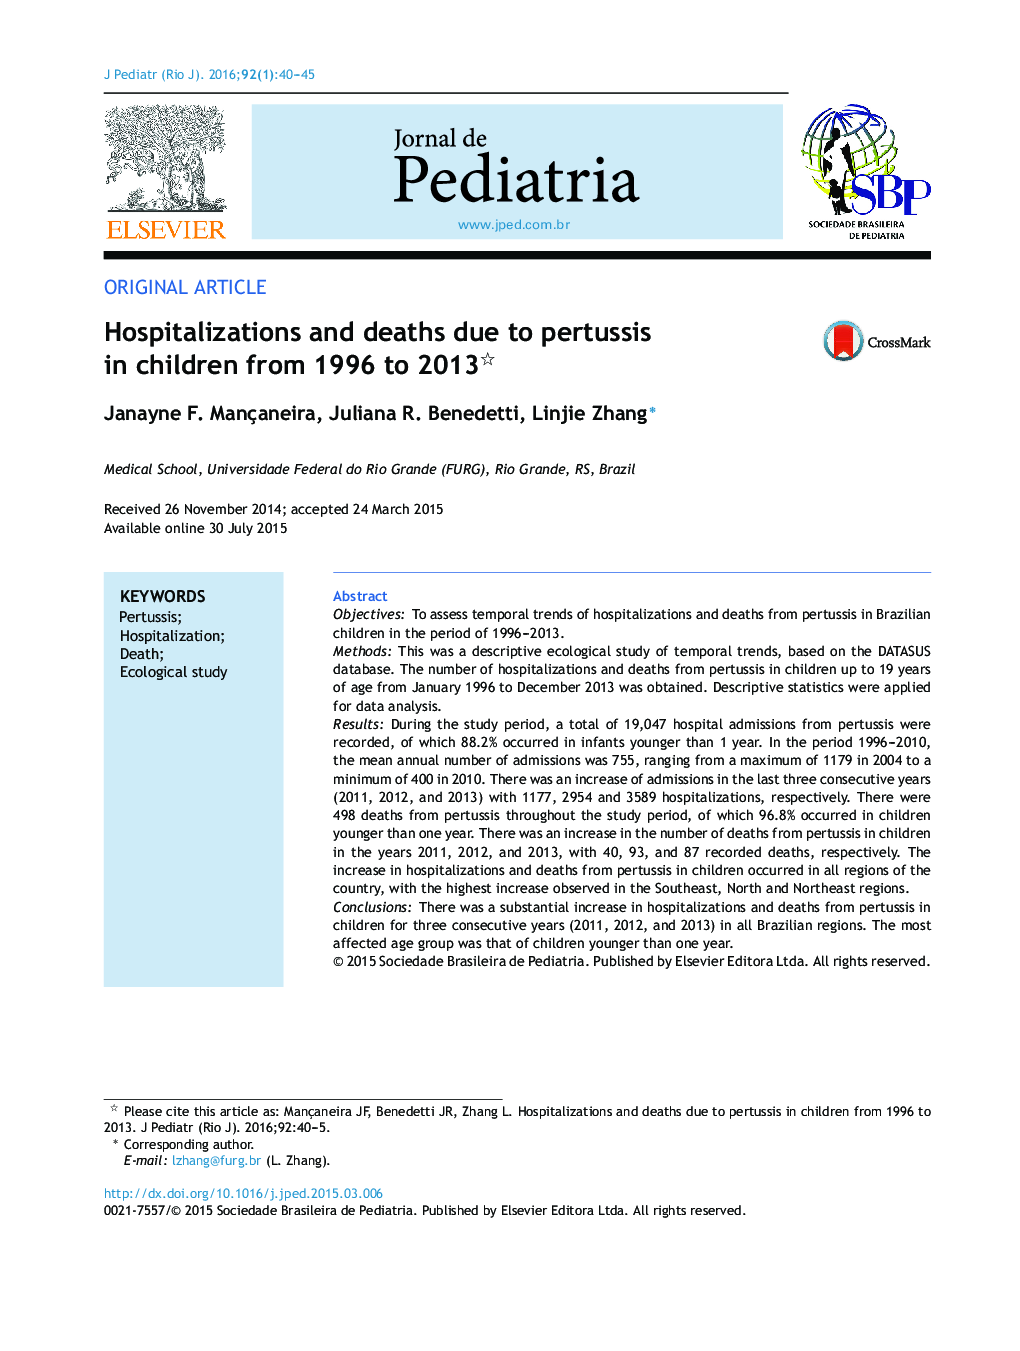 Hospitalizations and deaths due to pertussis in children from 1996 to 2013 